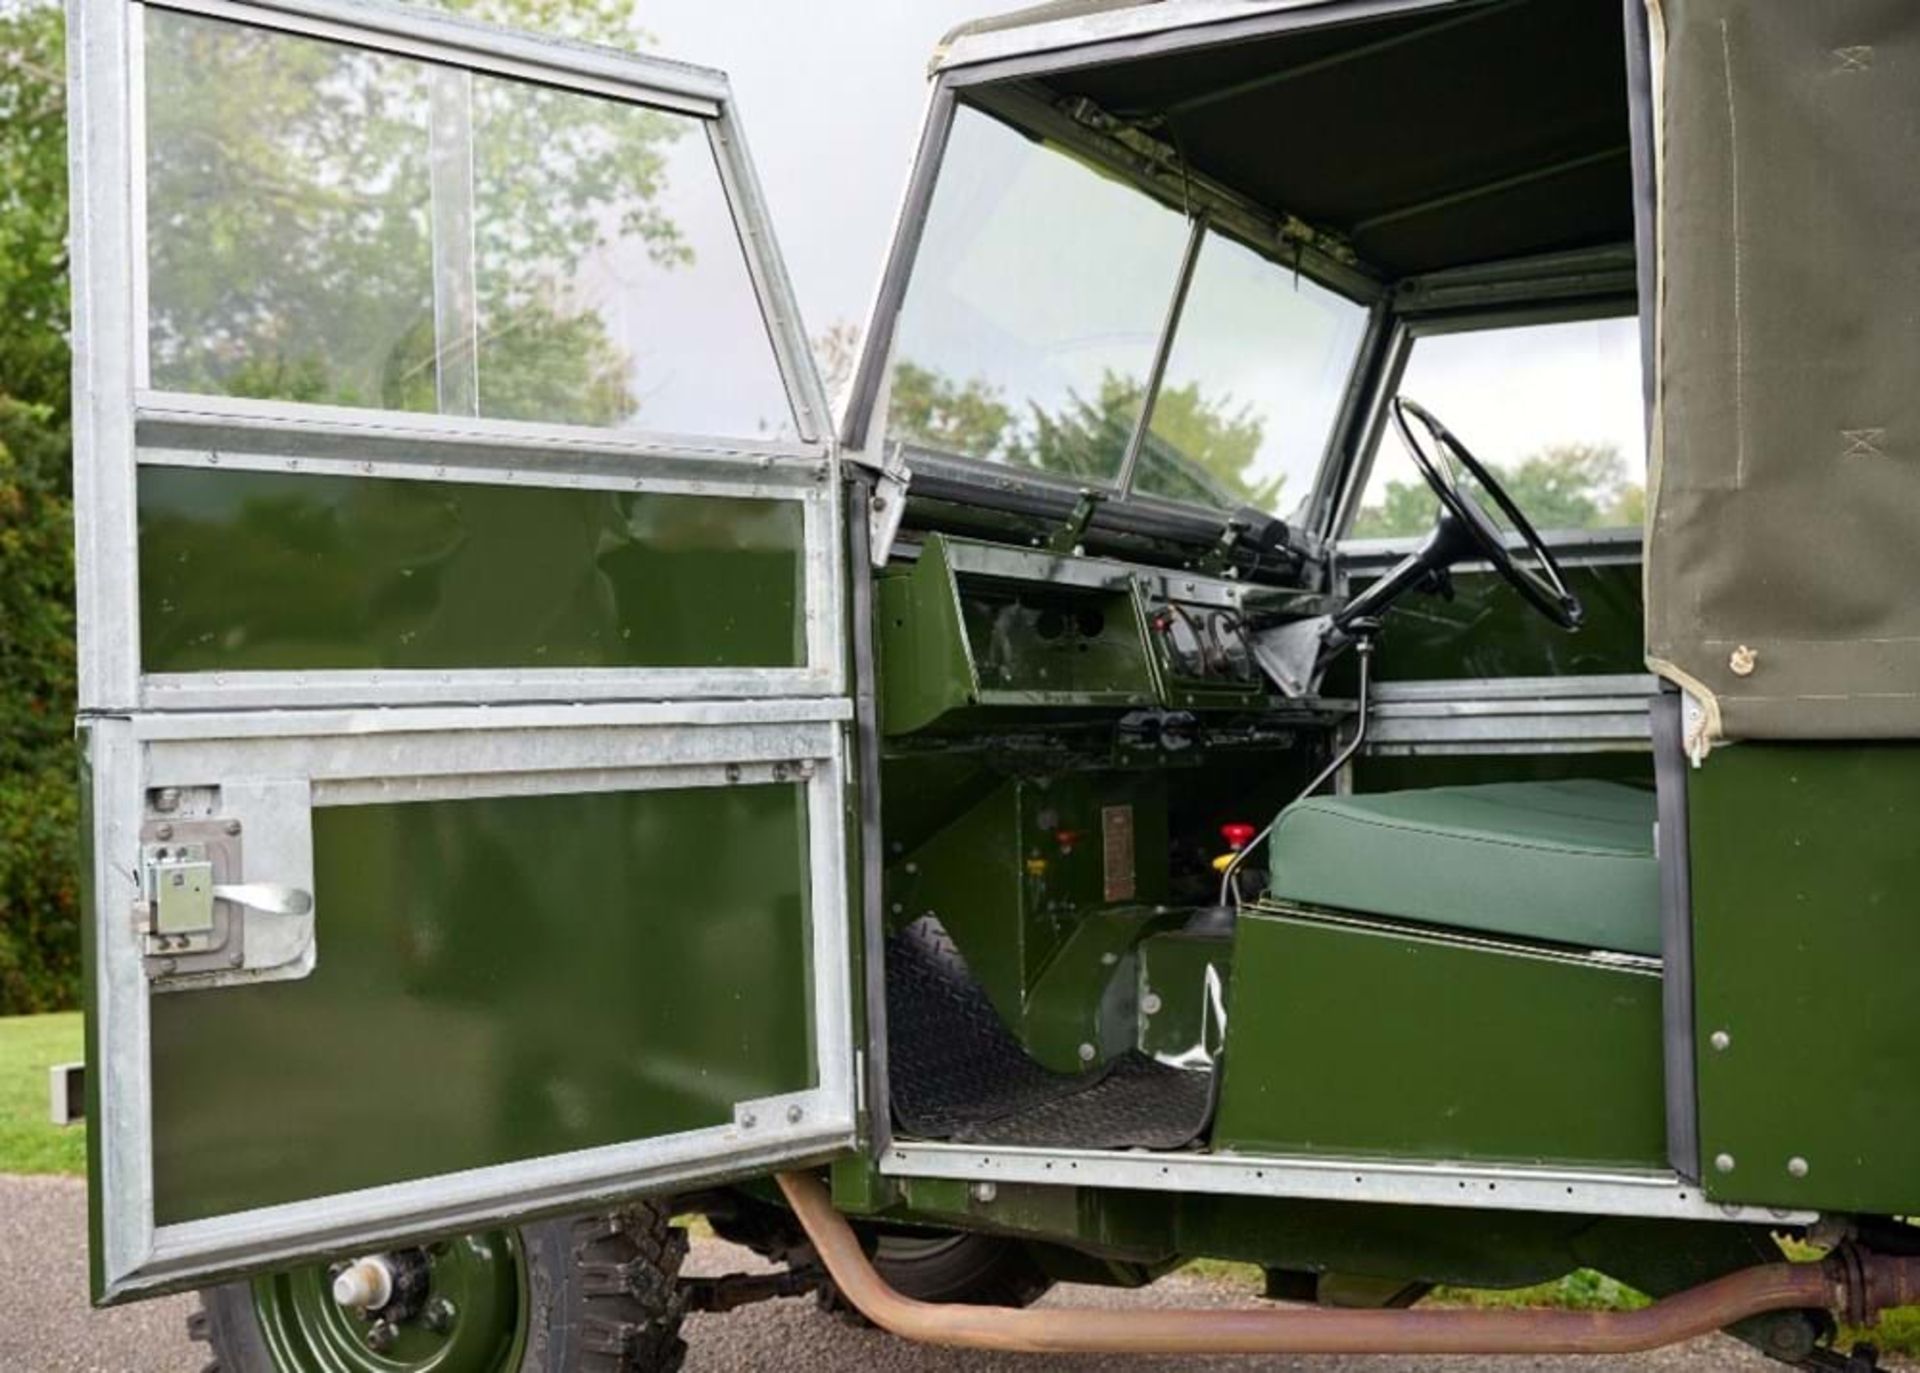 1954 Land Rover Series I (86") - Image 10 of 10